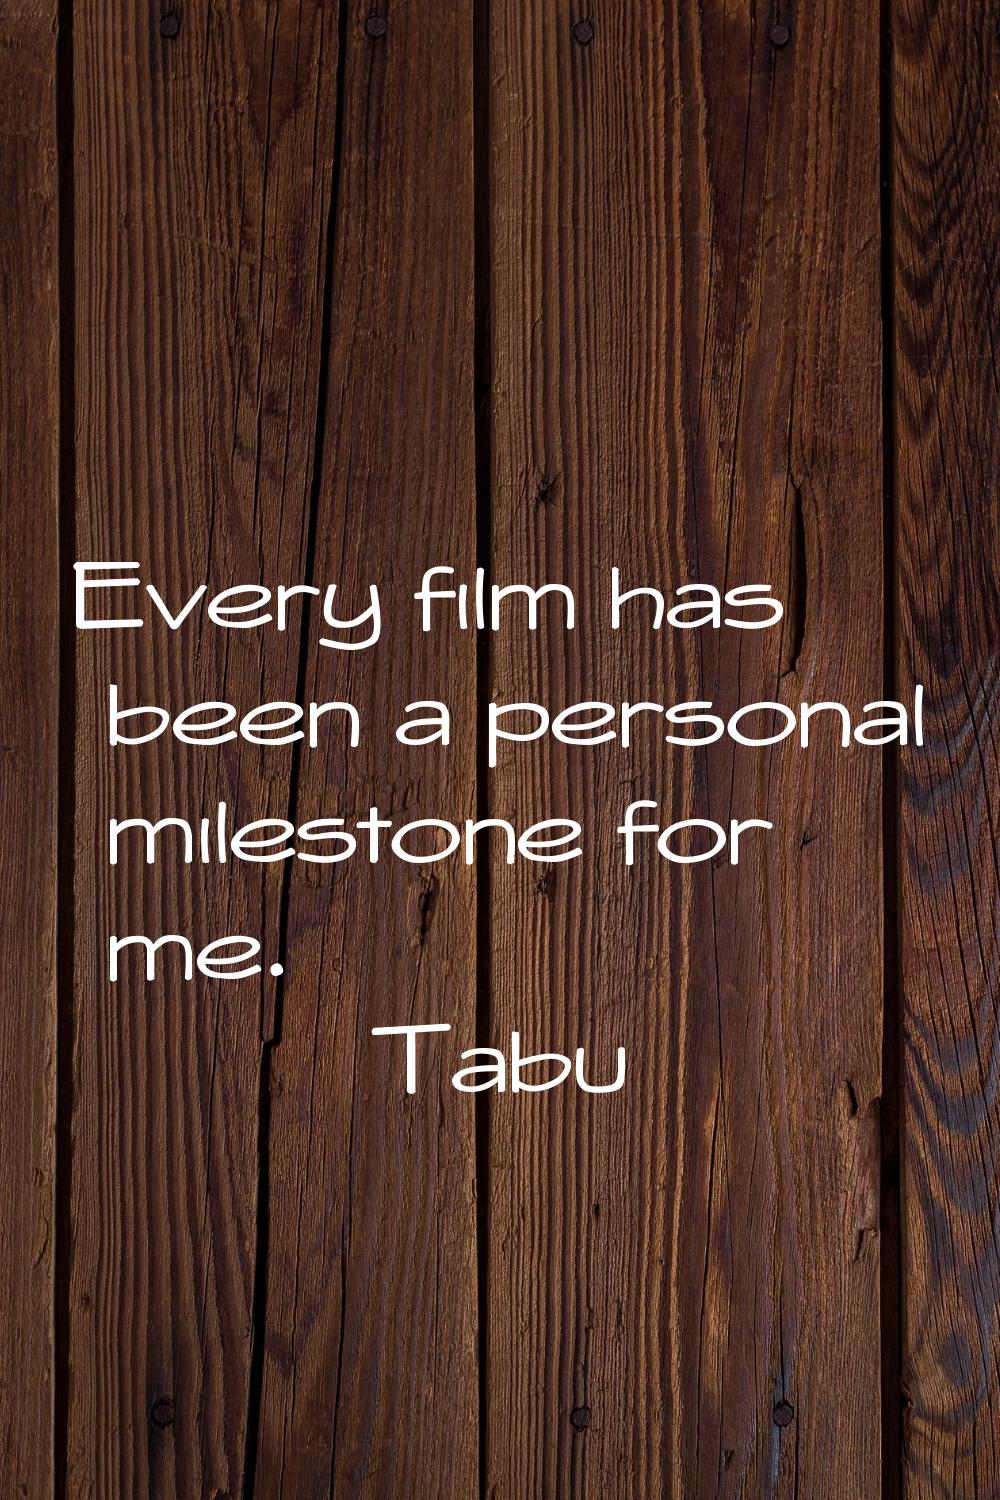 Every film has been a personal milestone for me.